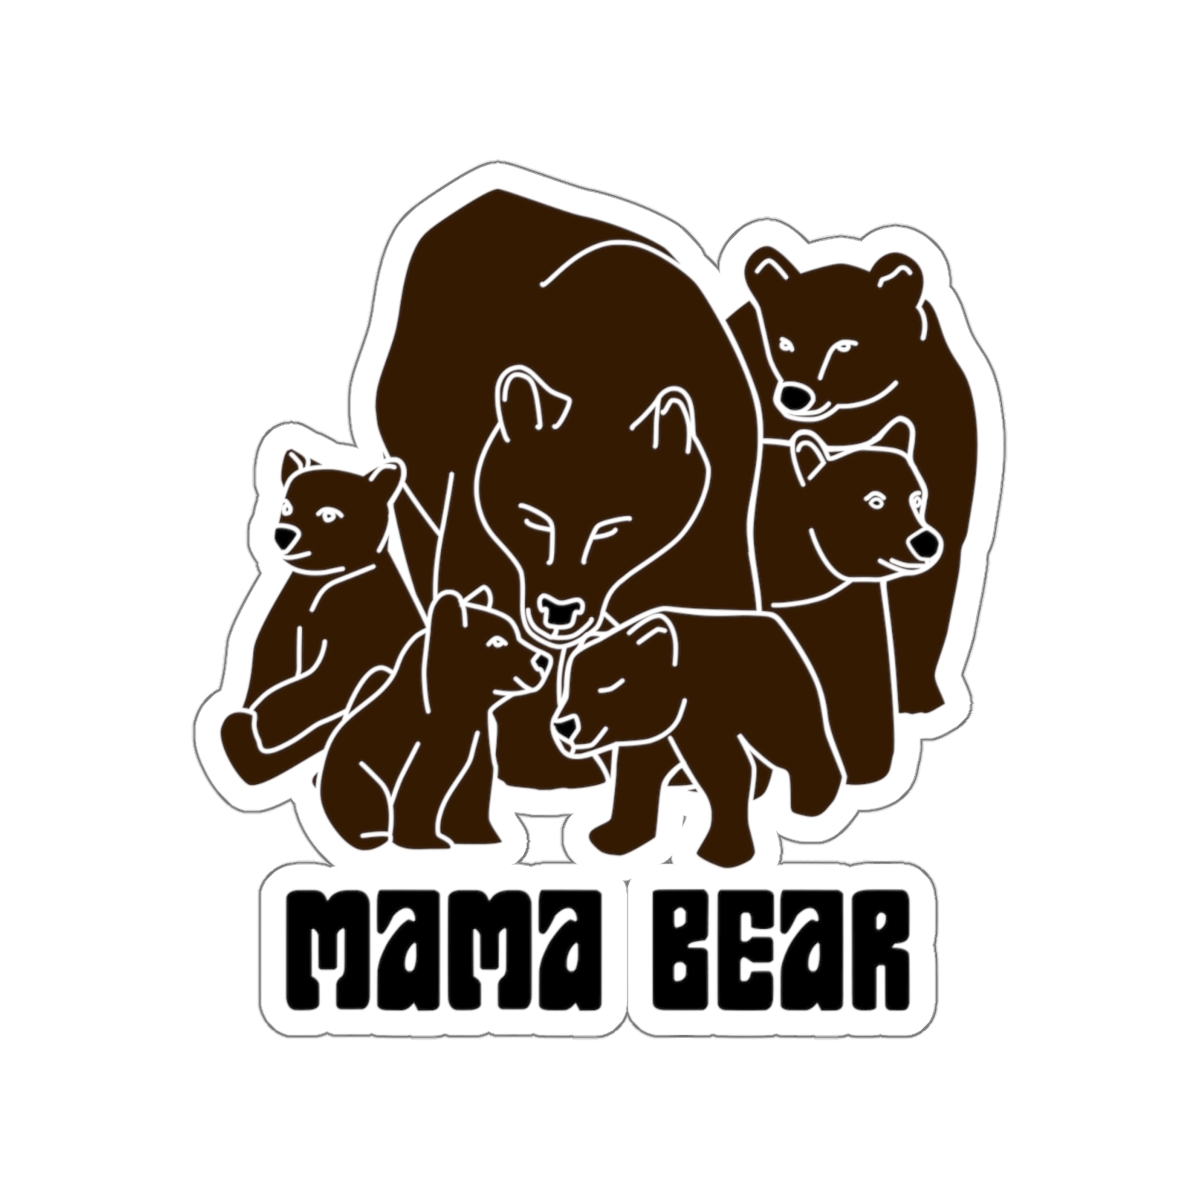 Mama Bear and Cubs Sticker for Sale by Erin0987